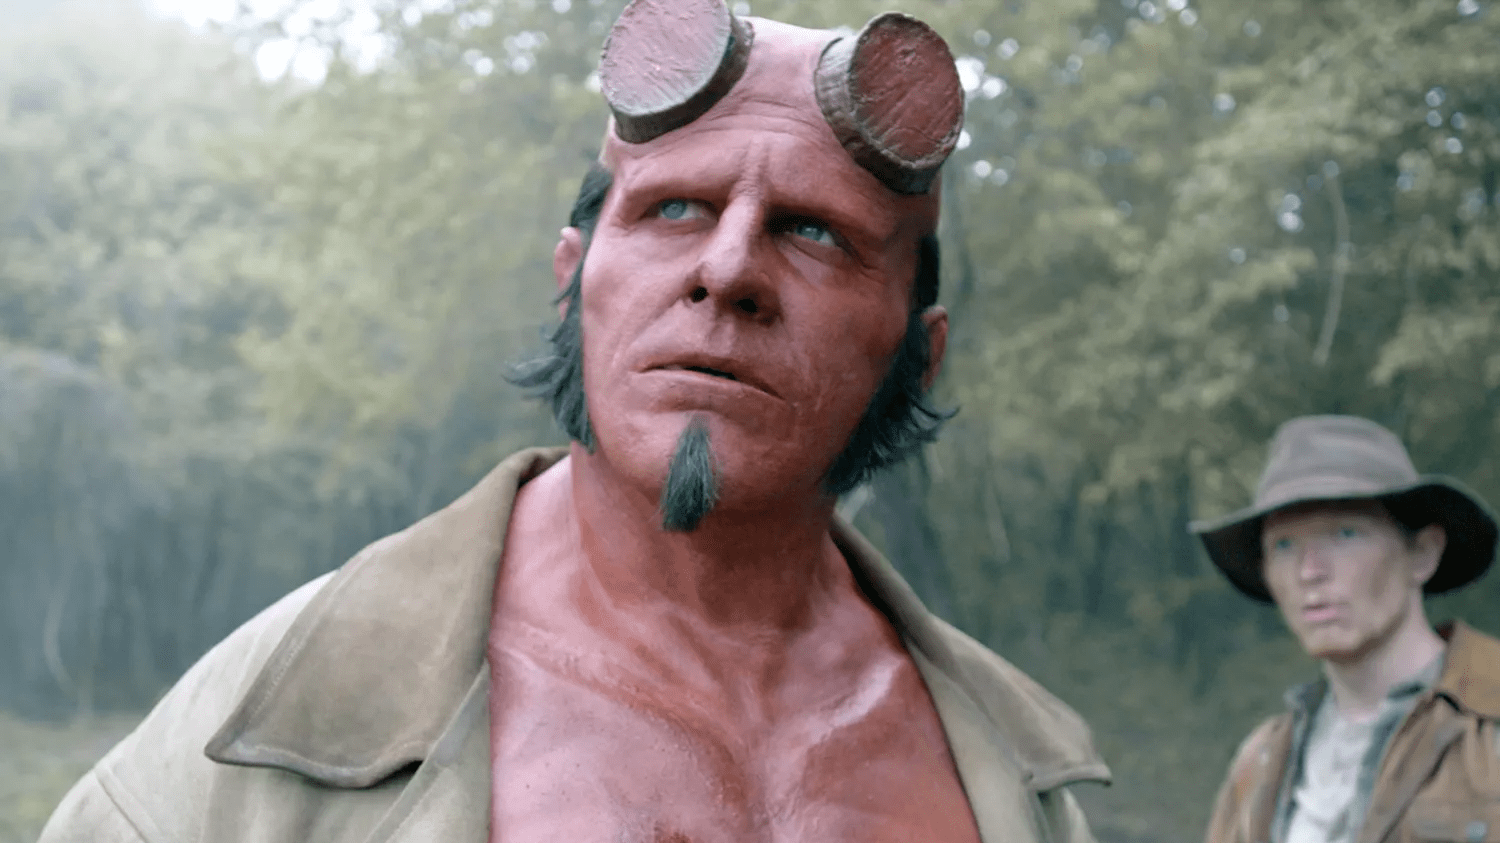 The First Trailer For the New Hellboy Reboot Is Here to Tell You There’s a New Hellboy Reboot